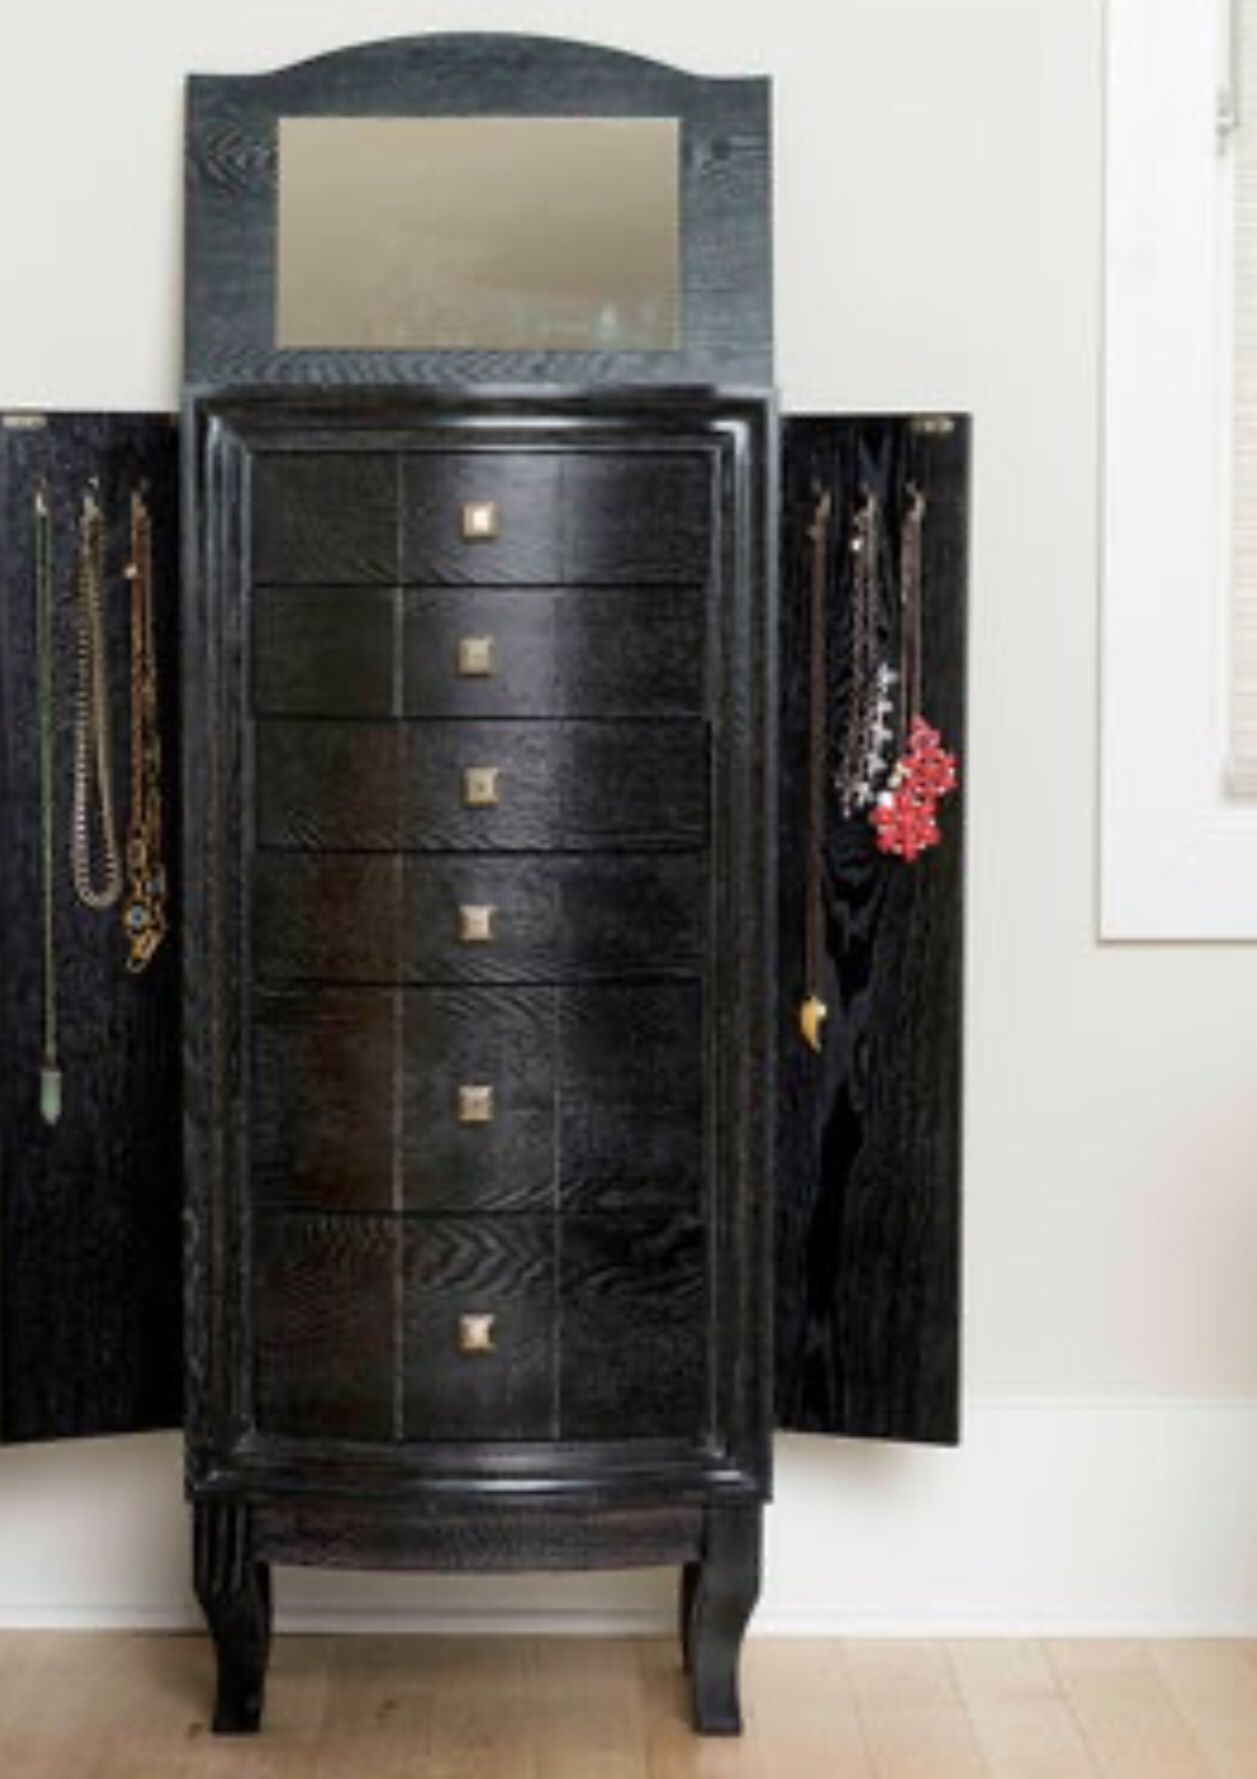 New!! Armoire, cabinet, 2 door6 drawer and a mirror jewelry cabinet, storage unit, jewelry organizer, jewelry armoire, black